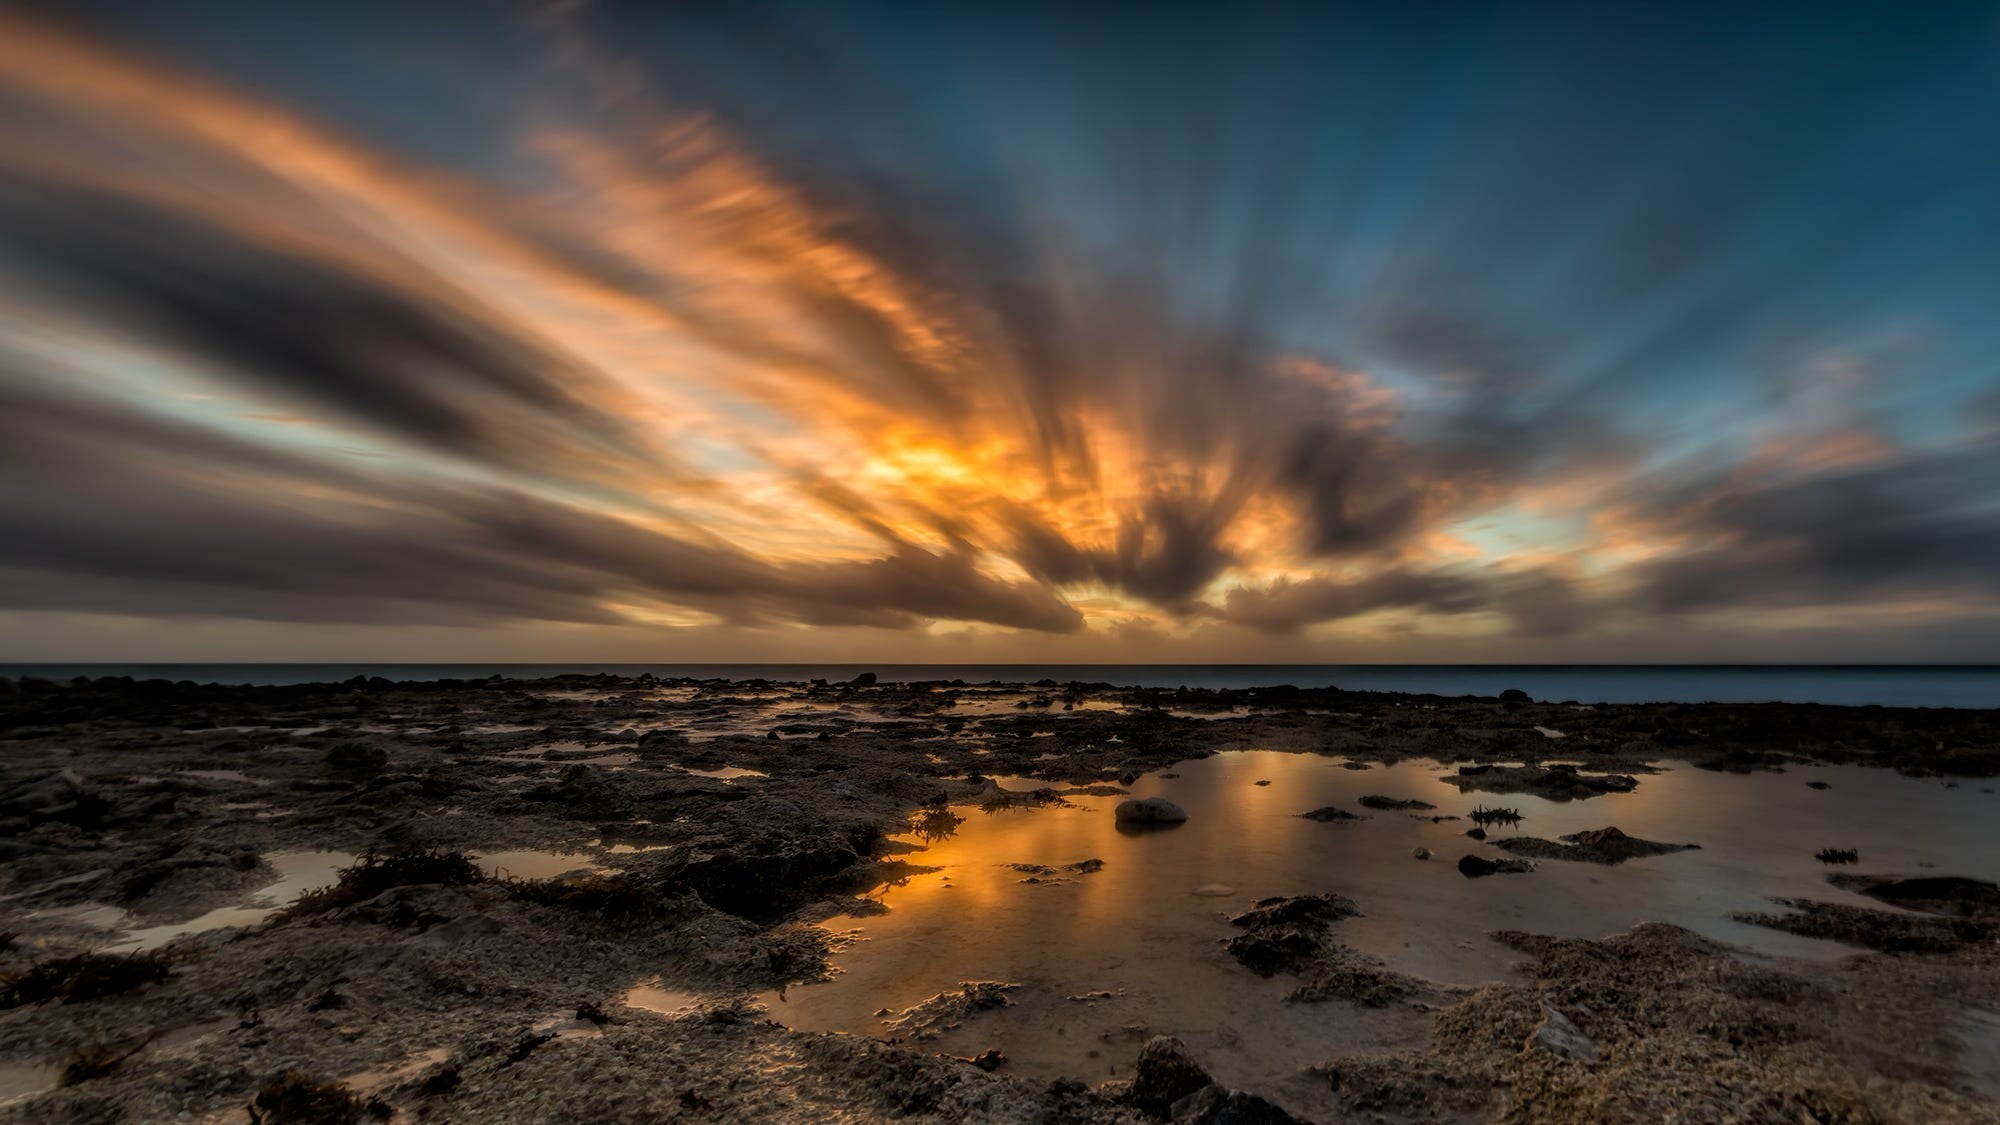 timelapse photography of soil and clouds at sunset, nature, landscape, long exposure, water